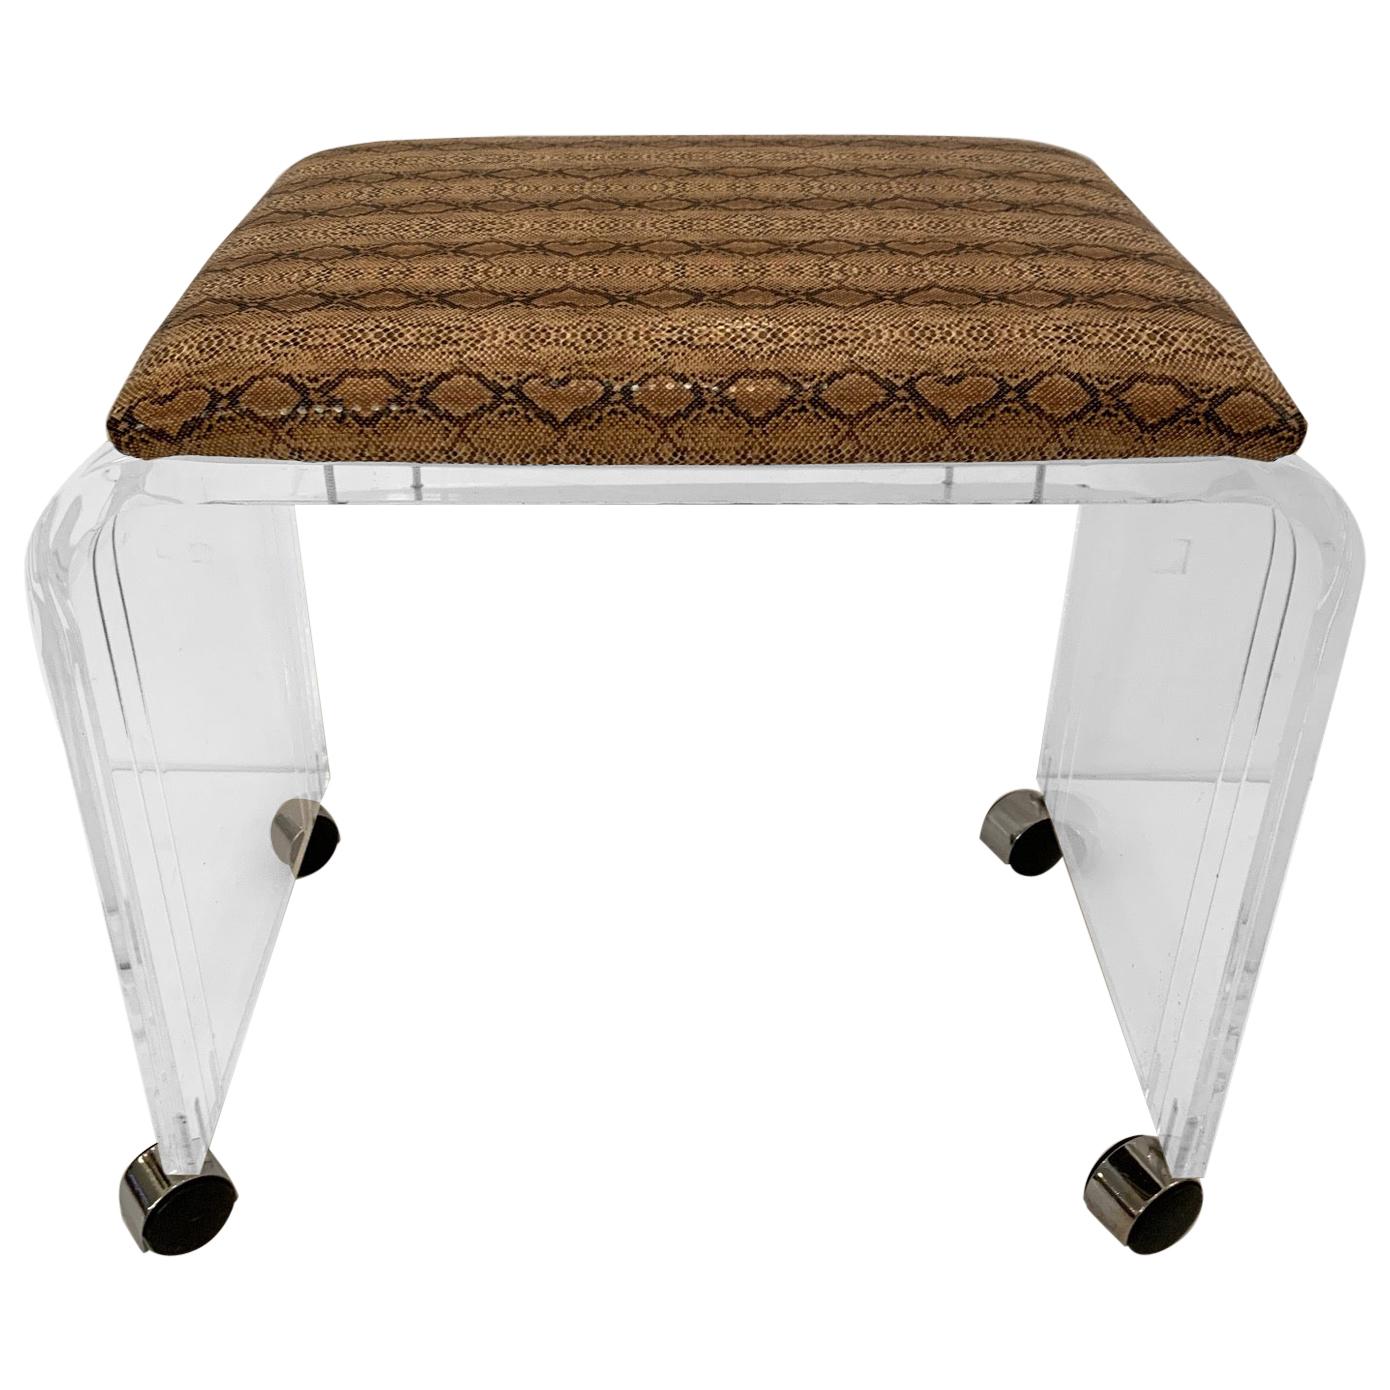 Cool Mid-Century Modern Lucite and Faux Snakeskin Bench Stool on Casters